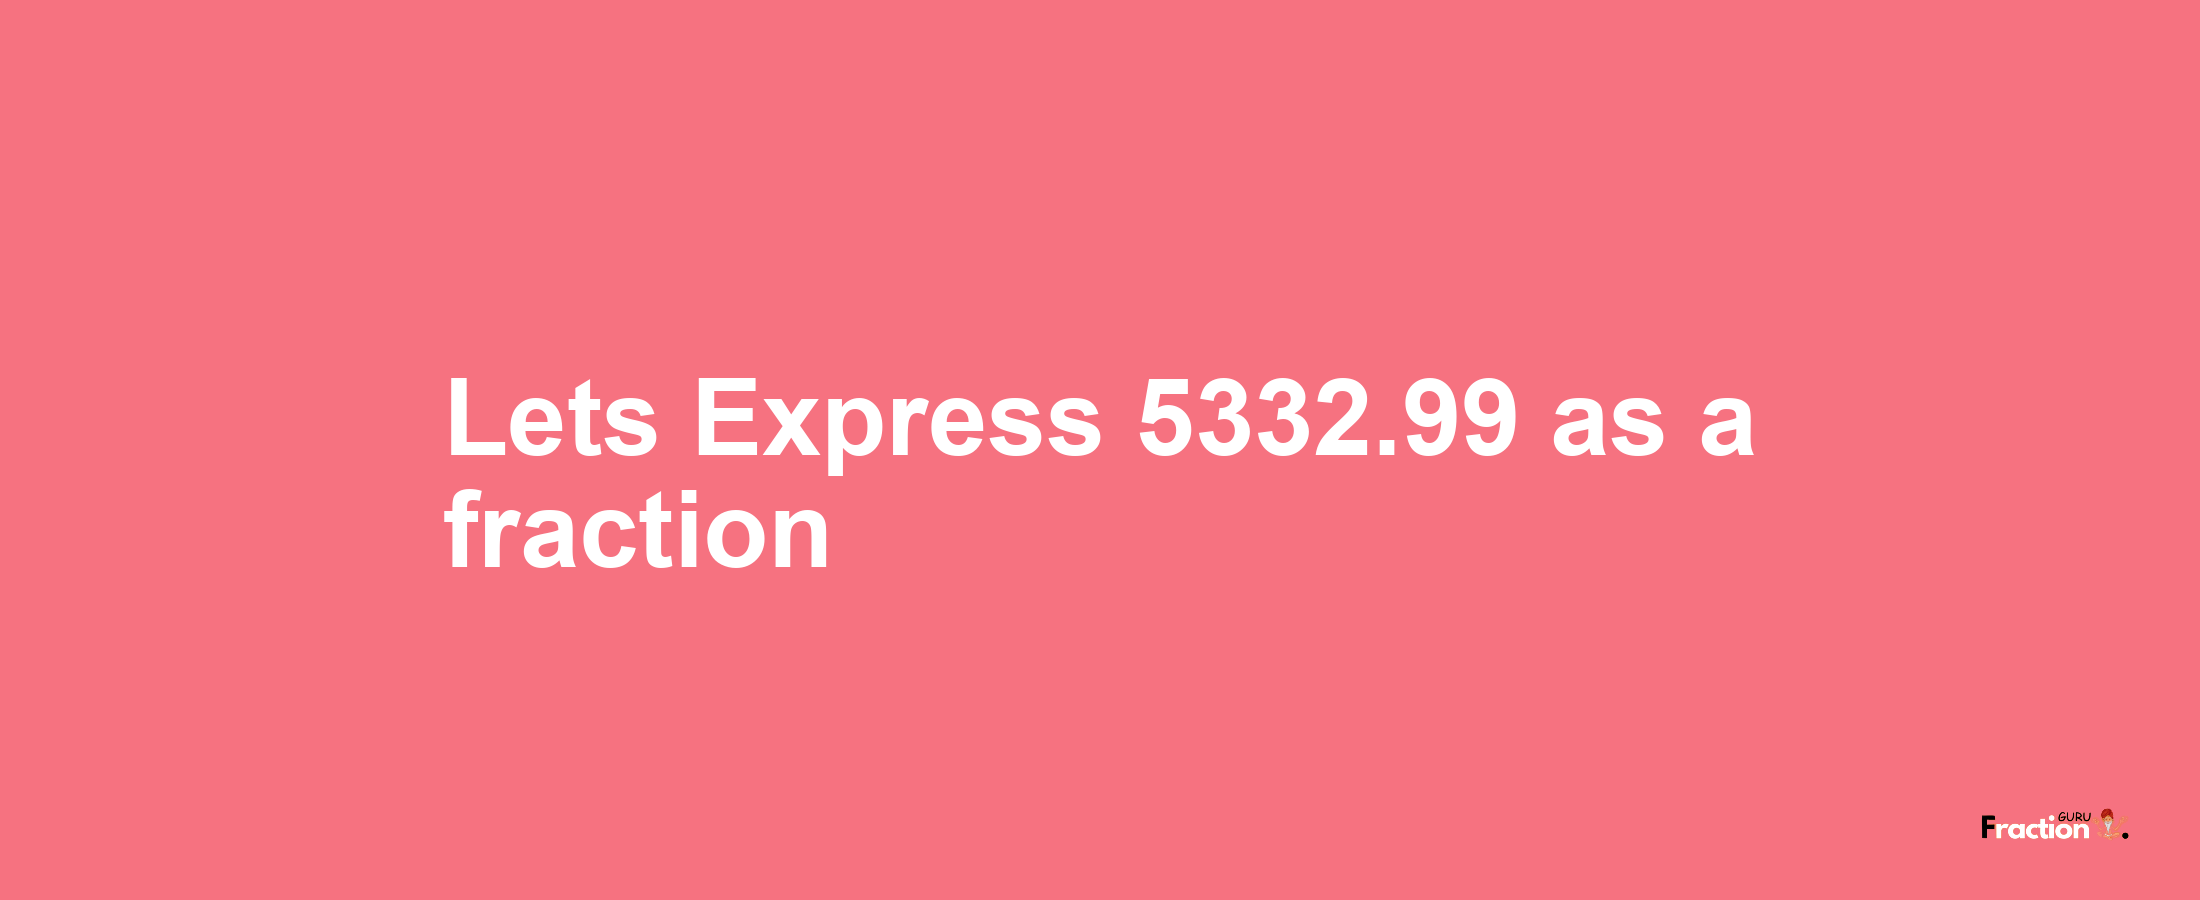 Lets Express 5332.99 as afraction